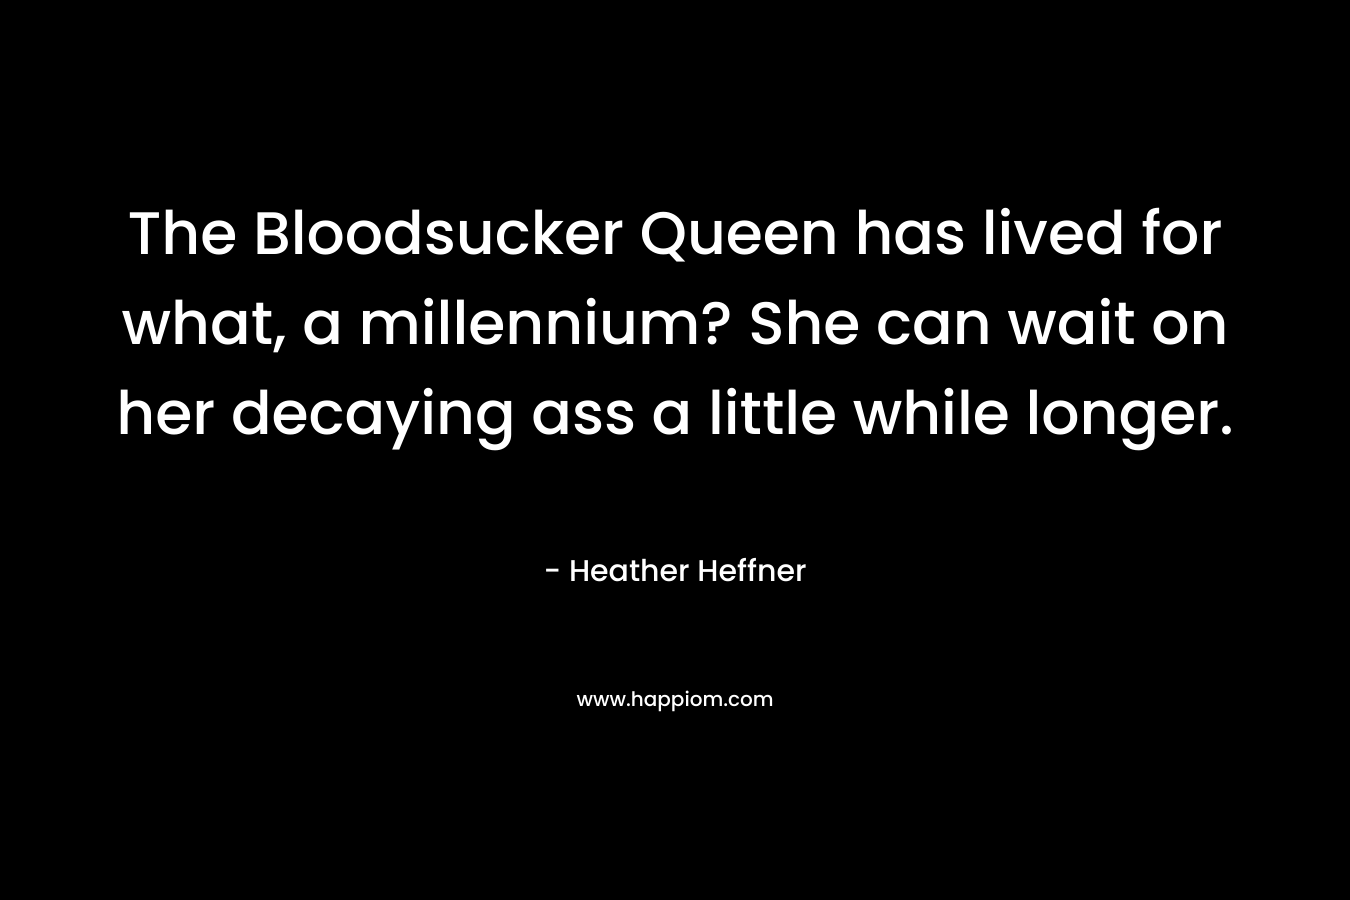 The Bloodsucker Queen has lived for what, a millennium? She can wait on her decaying ass a little while longer. – Heather Heffner